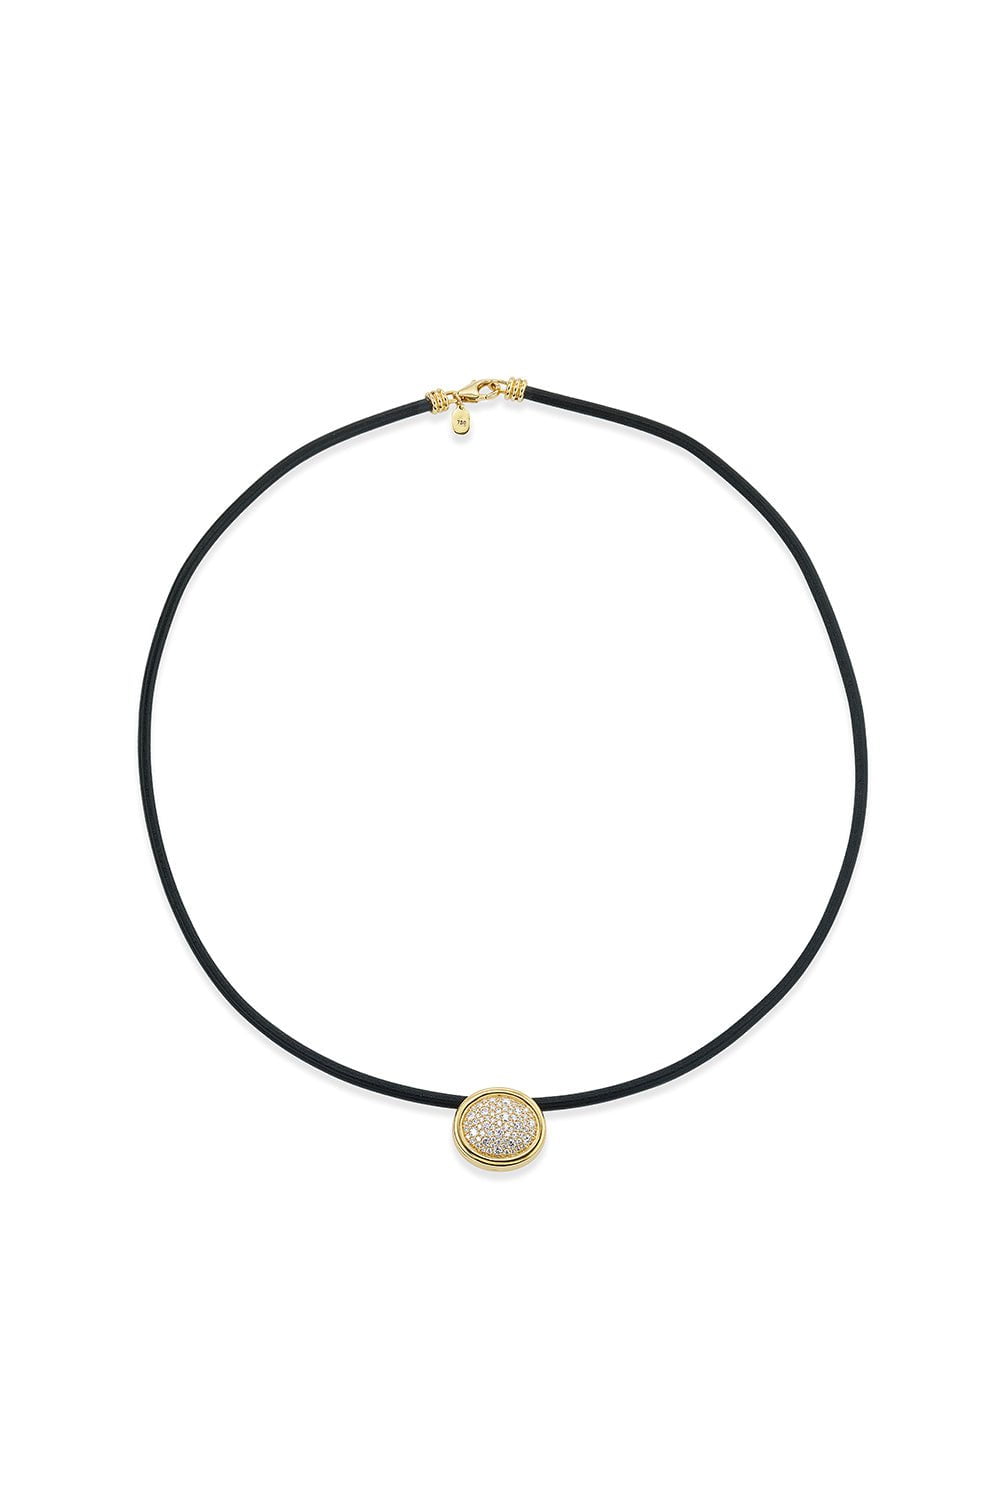 BECK JEWELS-Scuba Leather Choker Necklace-YELLOW GOLD